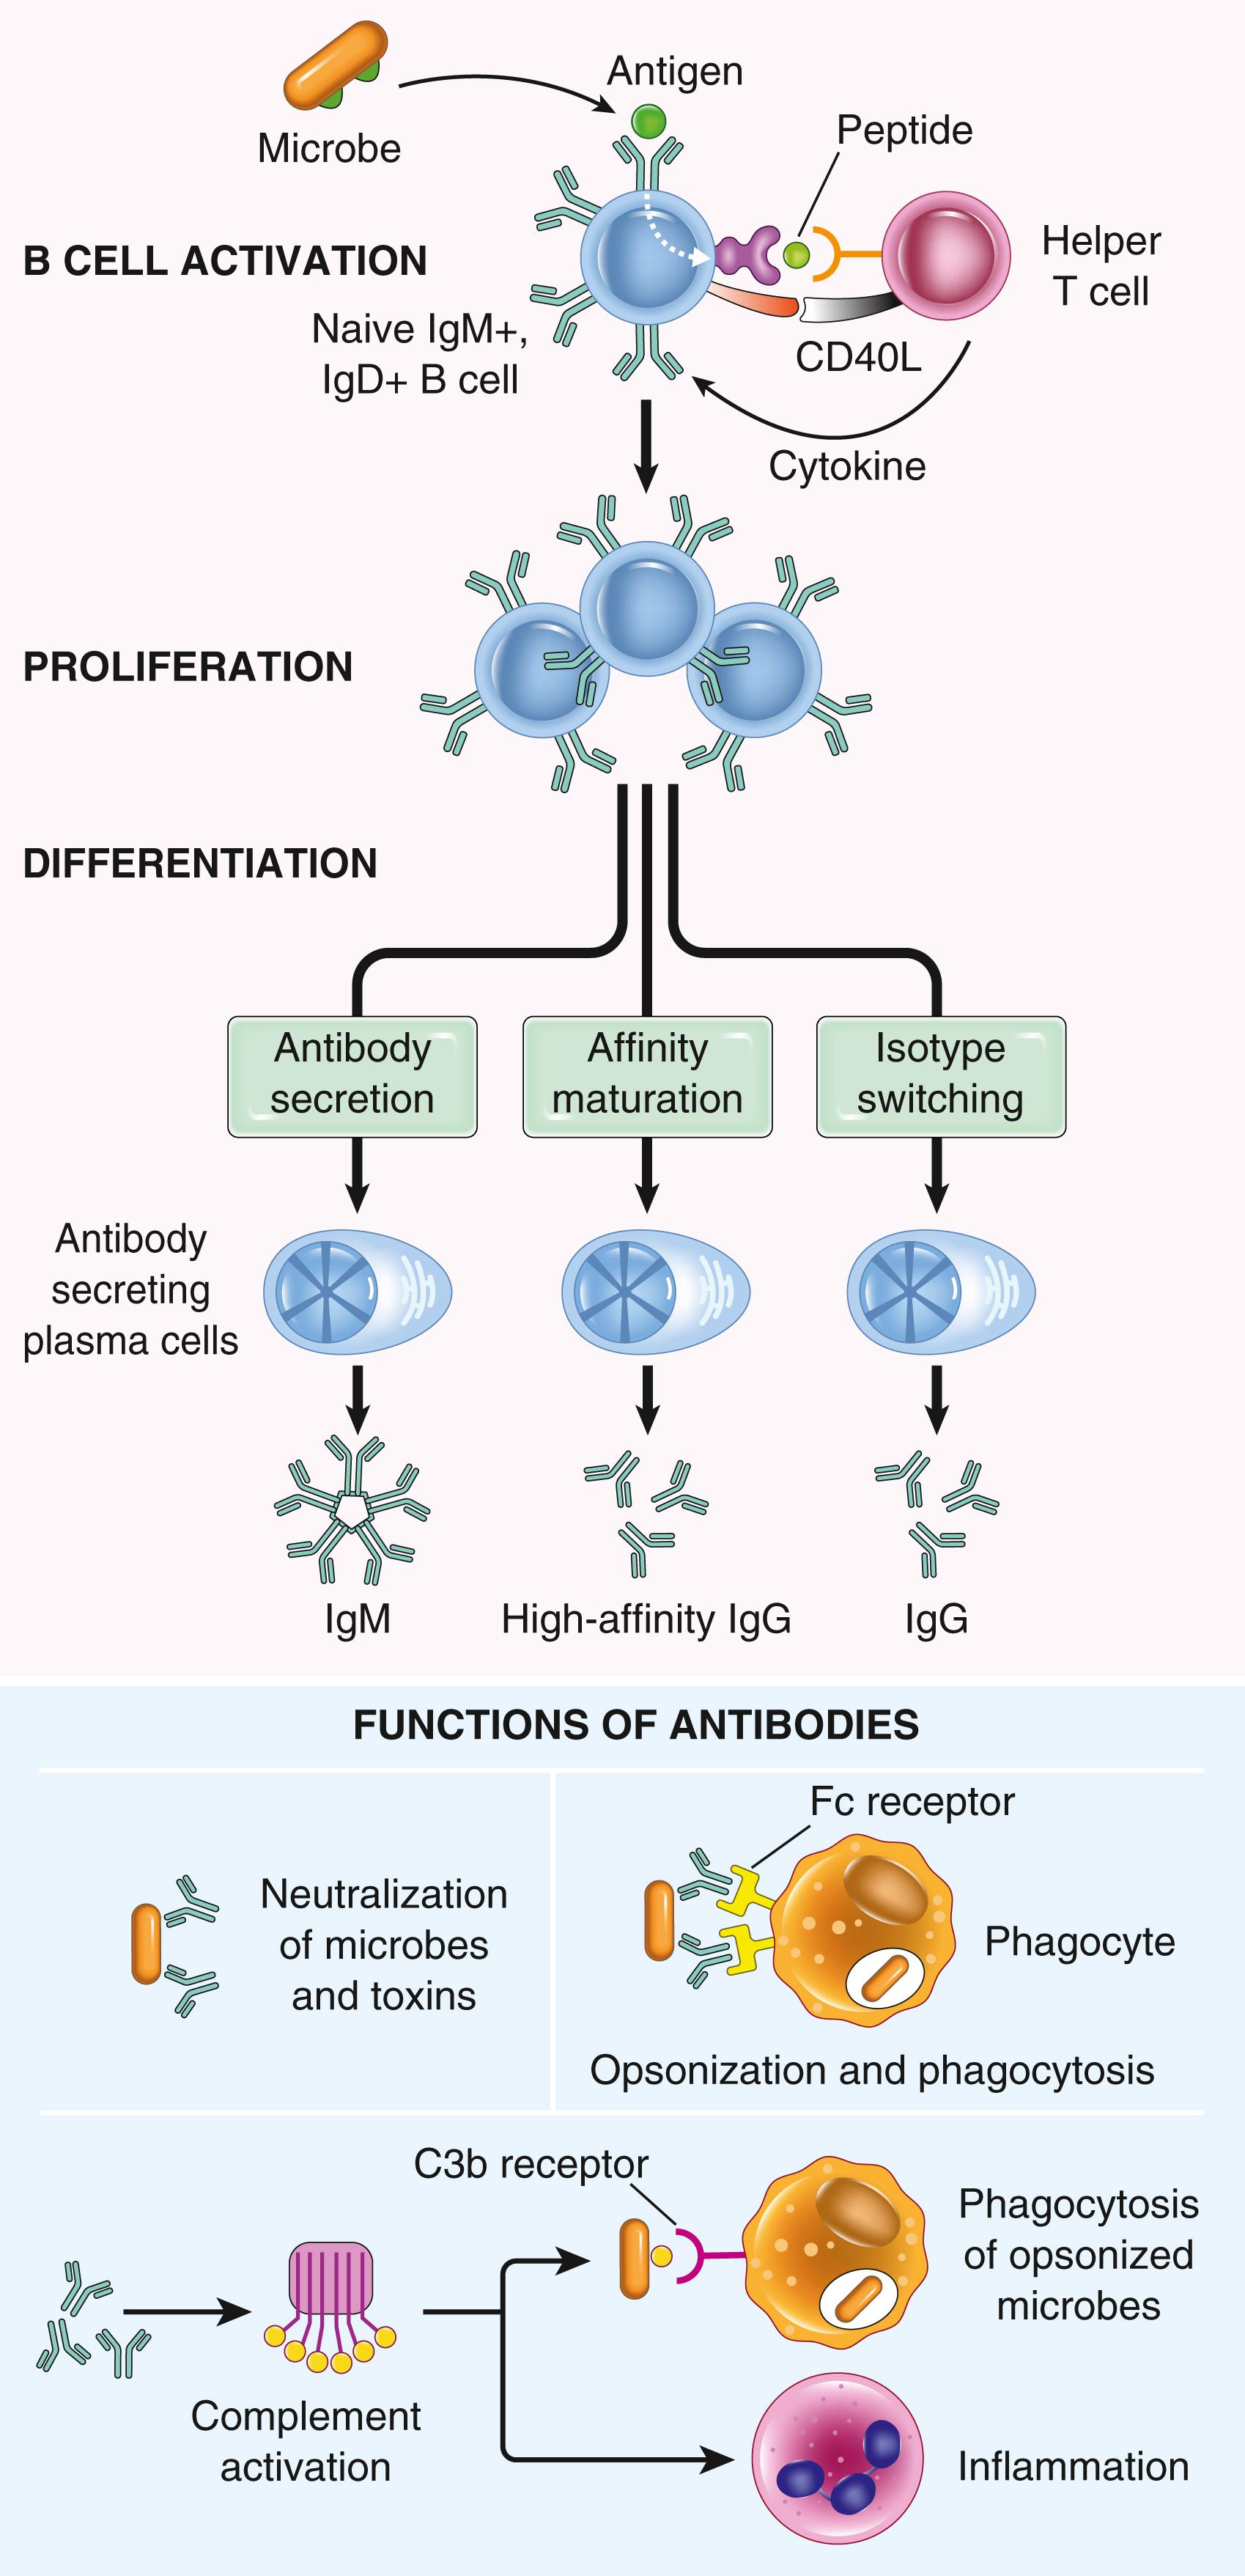 FIG. 5.9, Humoral immunity. Naïve B lymphocytes recognize antigens, and under the influence of Th cells and other stimuli (not shown), the B cells are activated to proliferate and to differentiate into antibody-secreting plasma cells. Some of the activated B cells undergo heavy-chain class switching and affinity maturation, and some become long-lived memory cells. Antibodies of different heavy-chain classes (isotypes) perform different effector functions. Note that the antibodies shown are IgG; these and IgM activate complement; and the specialized functions of IgA (mucosal immunity) and IgE (mast cell and eosinophil activation) are not shown.